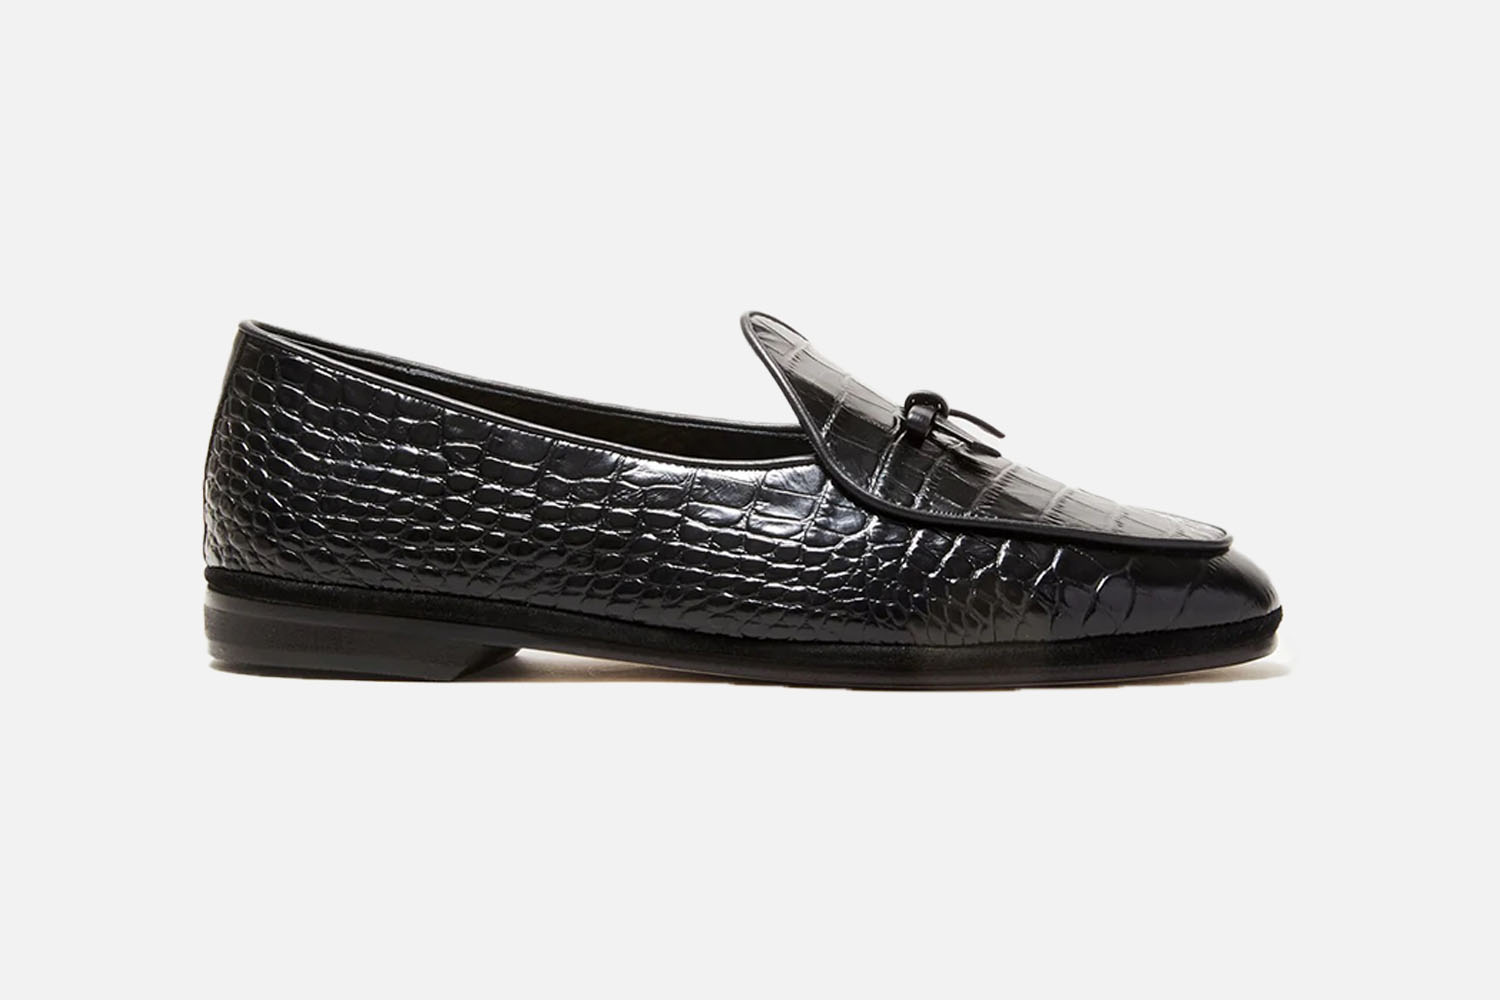 The Menswear Guy Masterpiece: Todd Snyder x Rubinacci Black Croc Leather Marphy Loafer